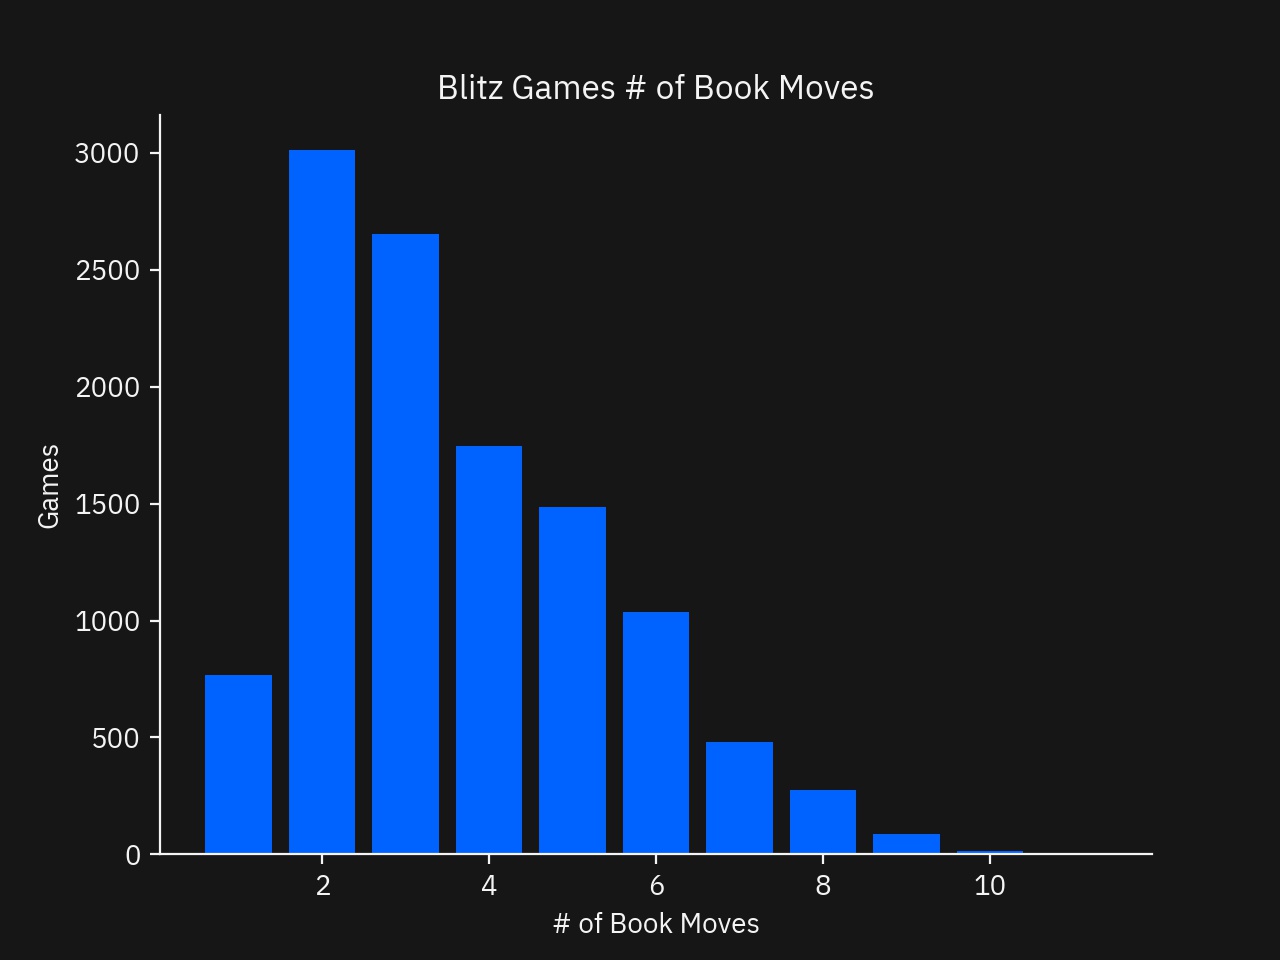 Bar graph of the number of games played grouped by the number of Book moves featured for Blitz games